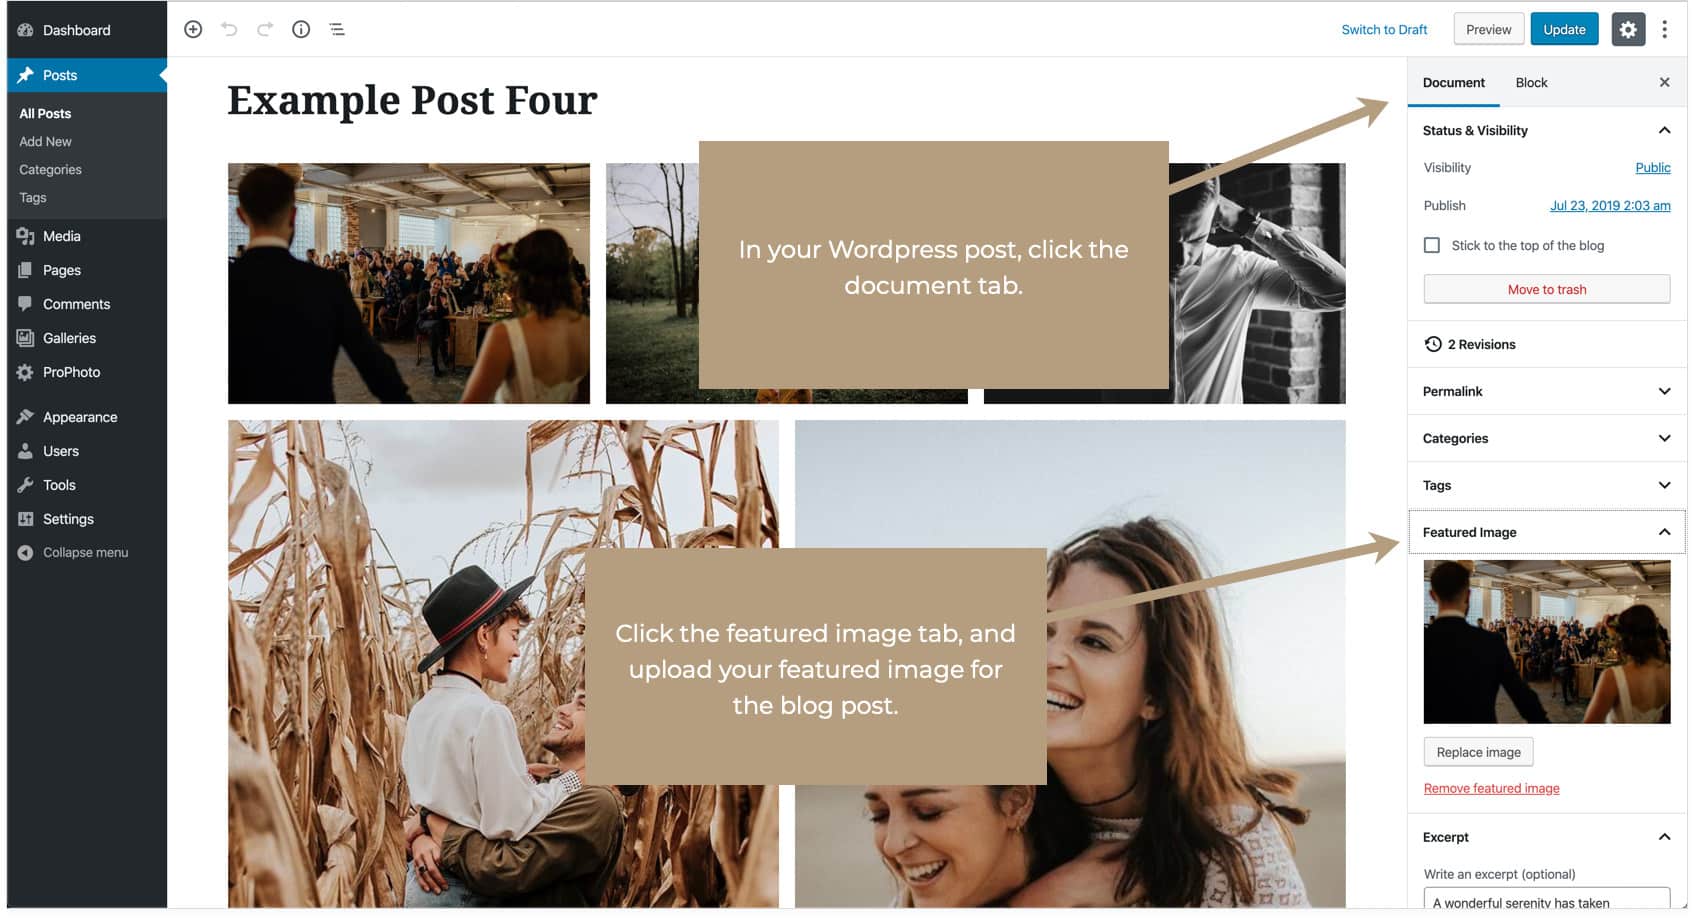 In your WordPress post, click the documents tab. Then click the featured image tab and upload your featured image for your blog post.